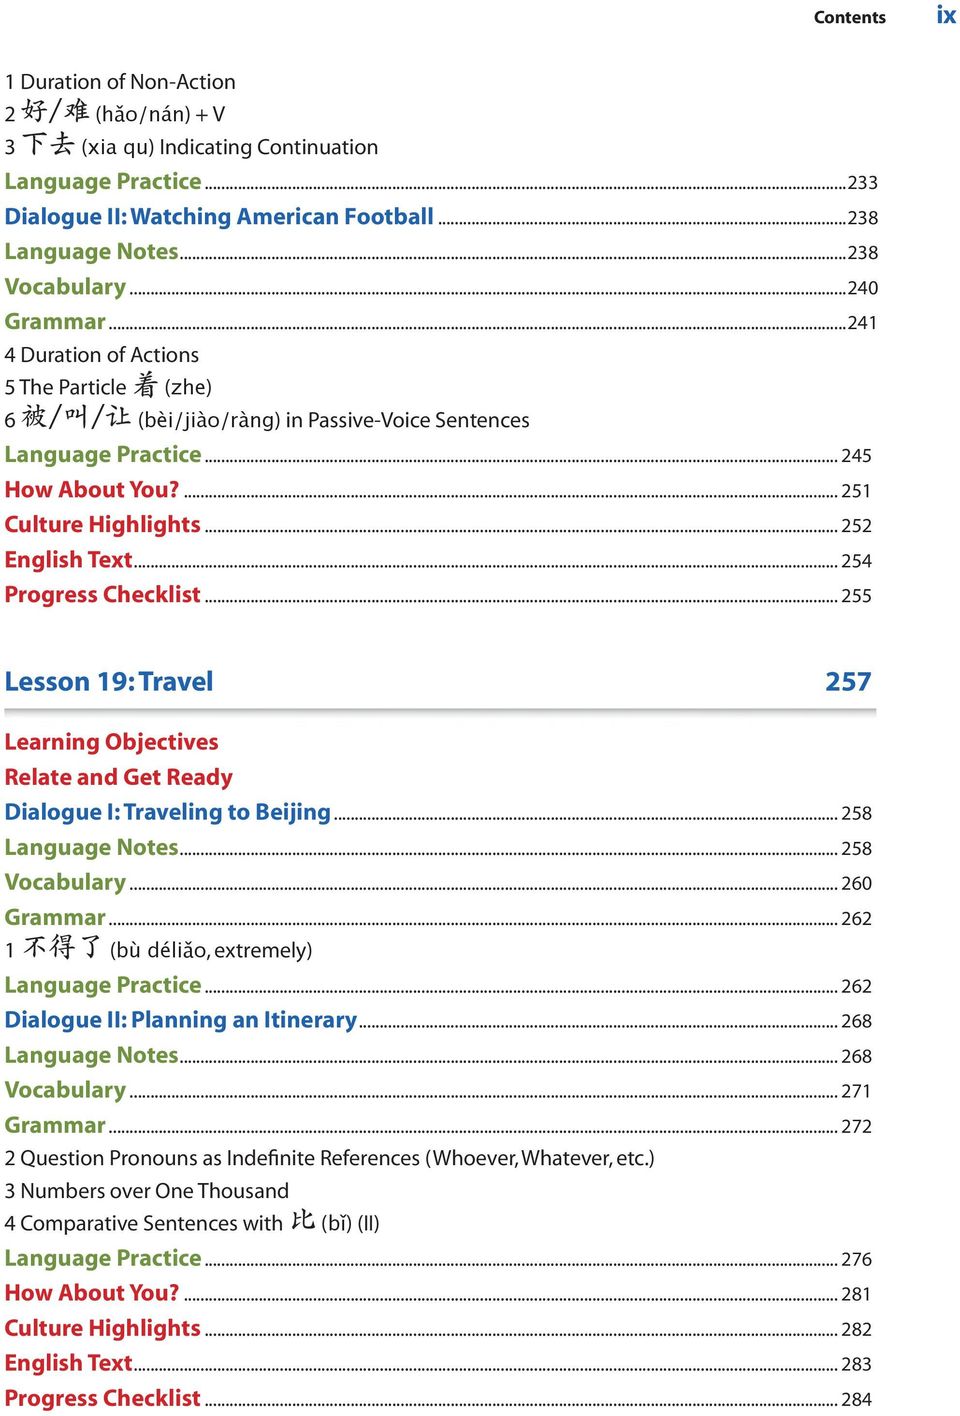 .. 252 English Text... 254 Progress Checklist... 255 Lesson 19: Travel 257 Learning Objectives Relate and Get Ready Dialogue I: Traveling to Beijing... 258 Language Notes... 258 Vocabulary.